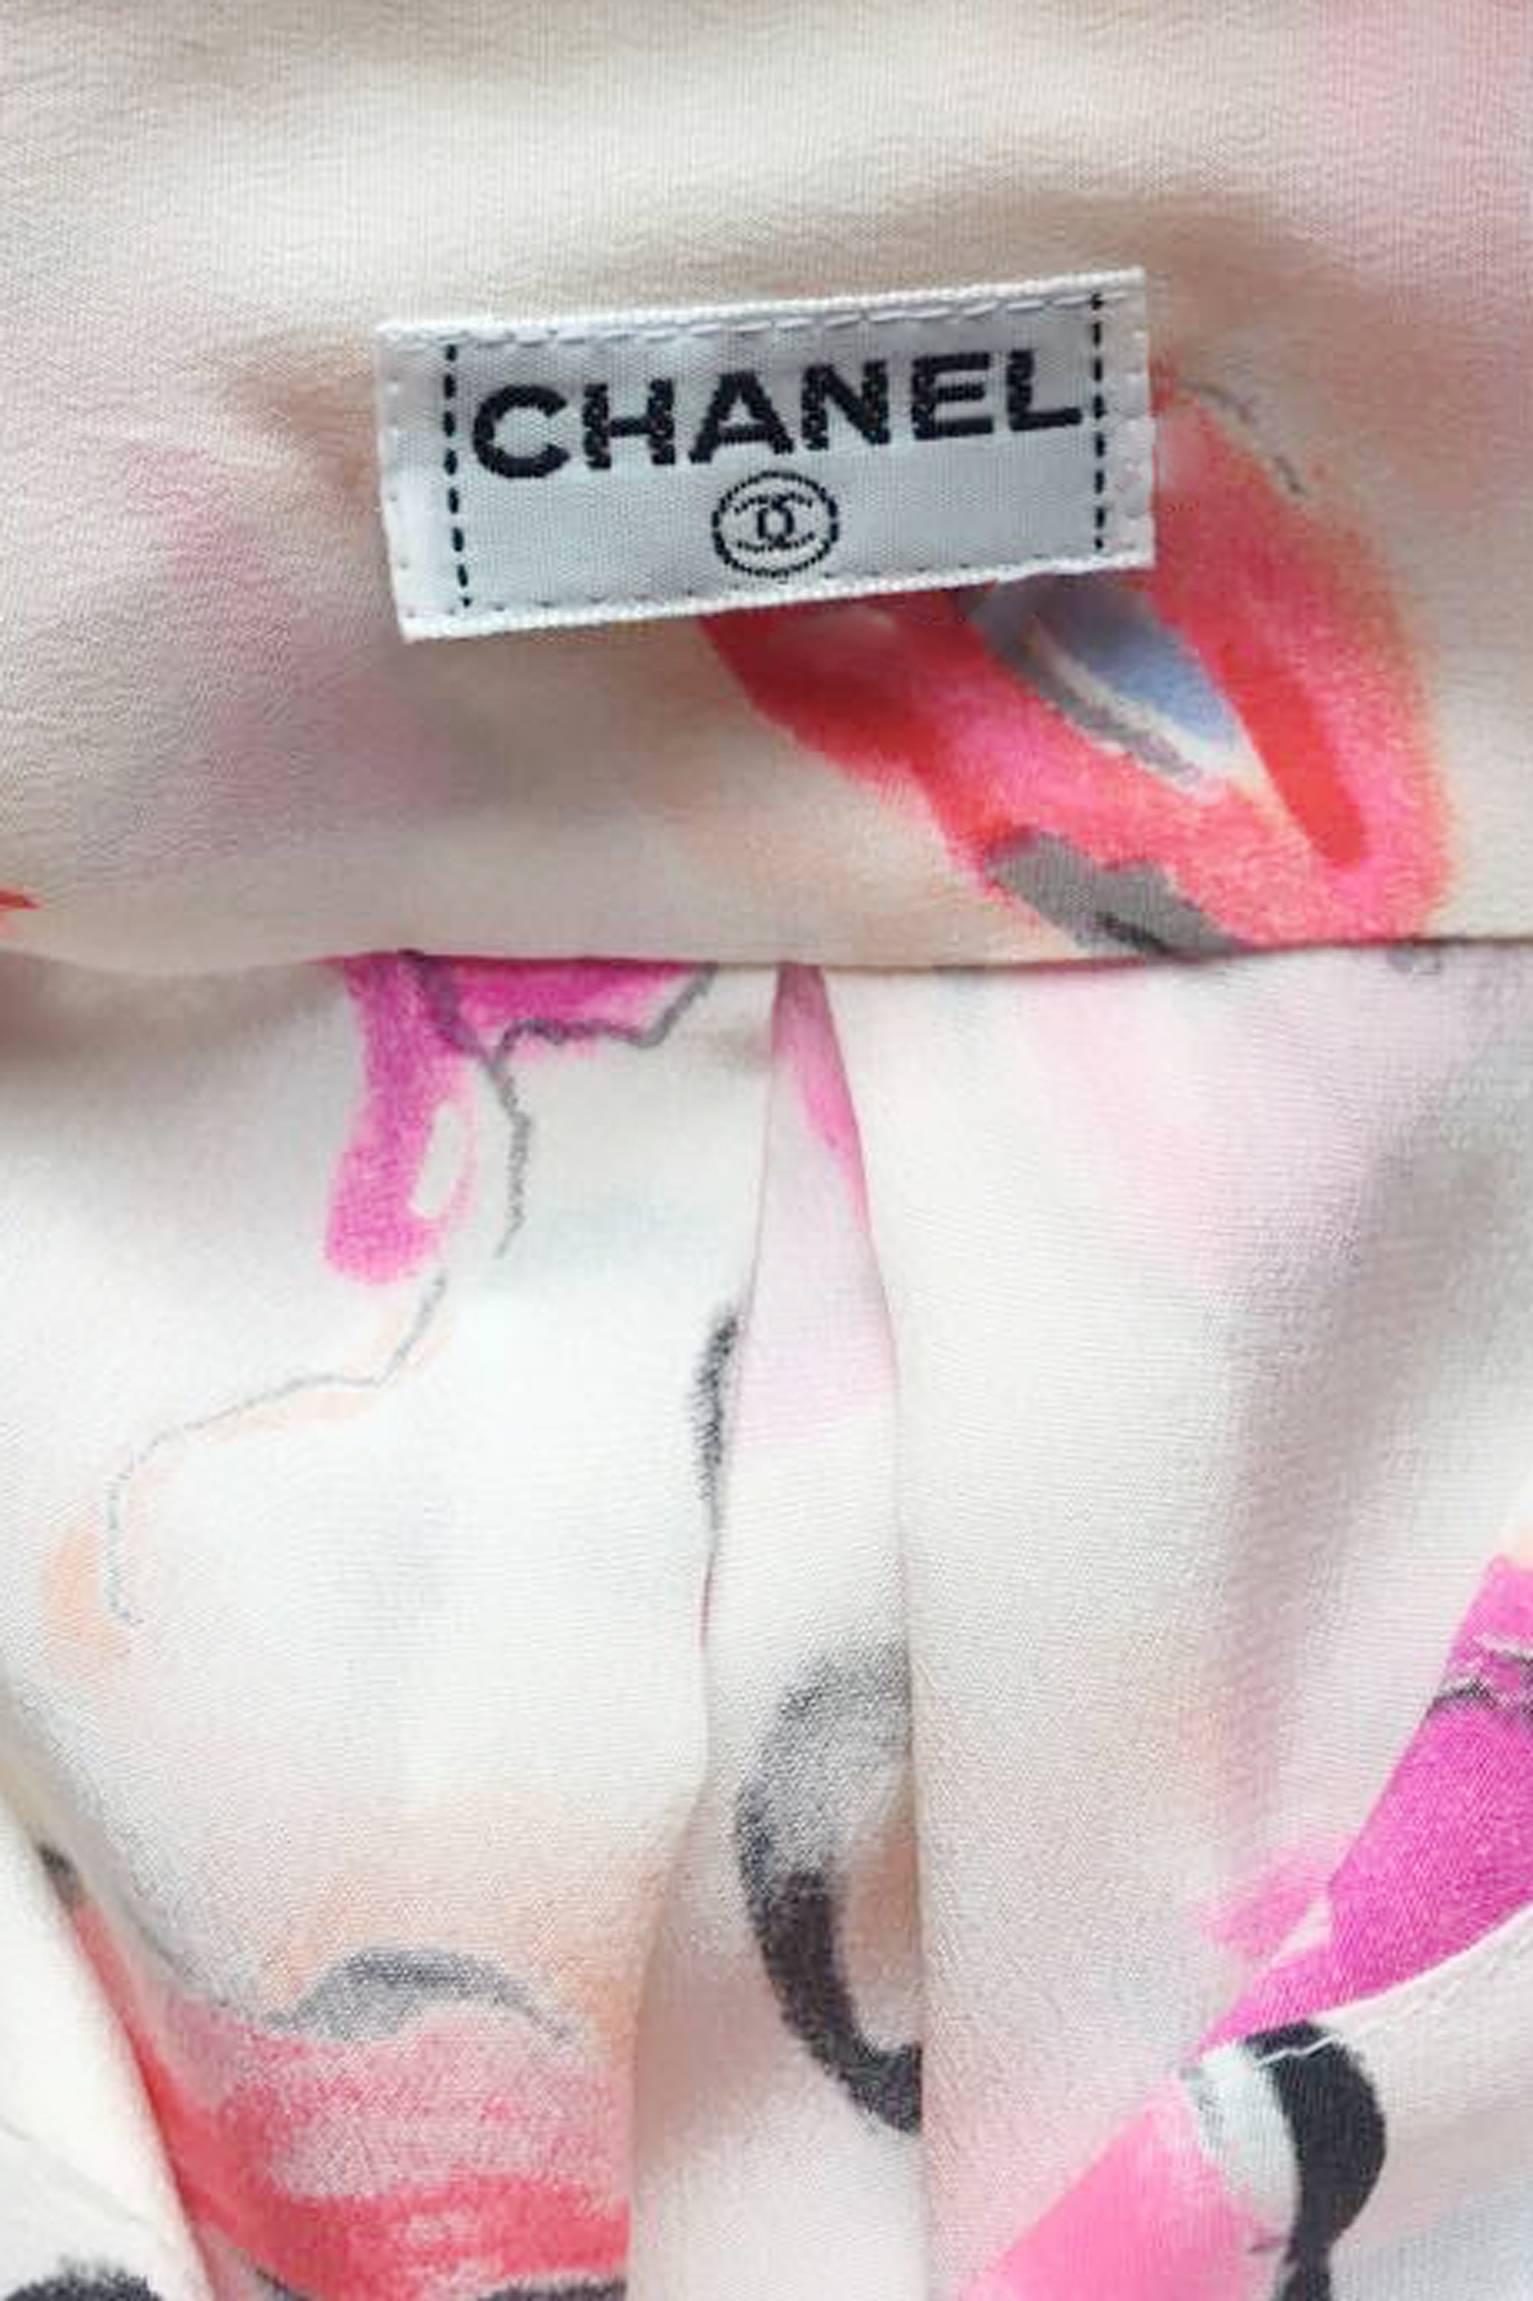 A 1980s white Chanel silk shirt with long tapered sleeves with one buttoned cuffs and a front buttoned closure. All gold colored buttons features the iconic double c logo. The shirt has a bright pink and red print portraying sassy lips with black